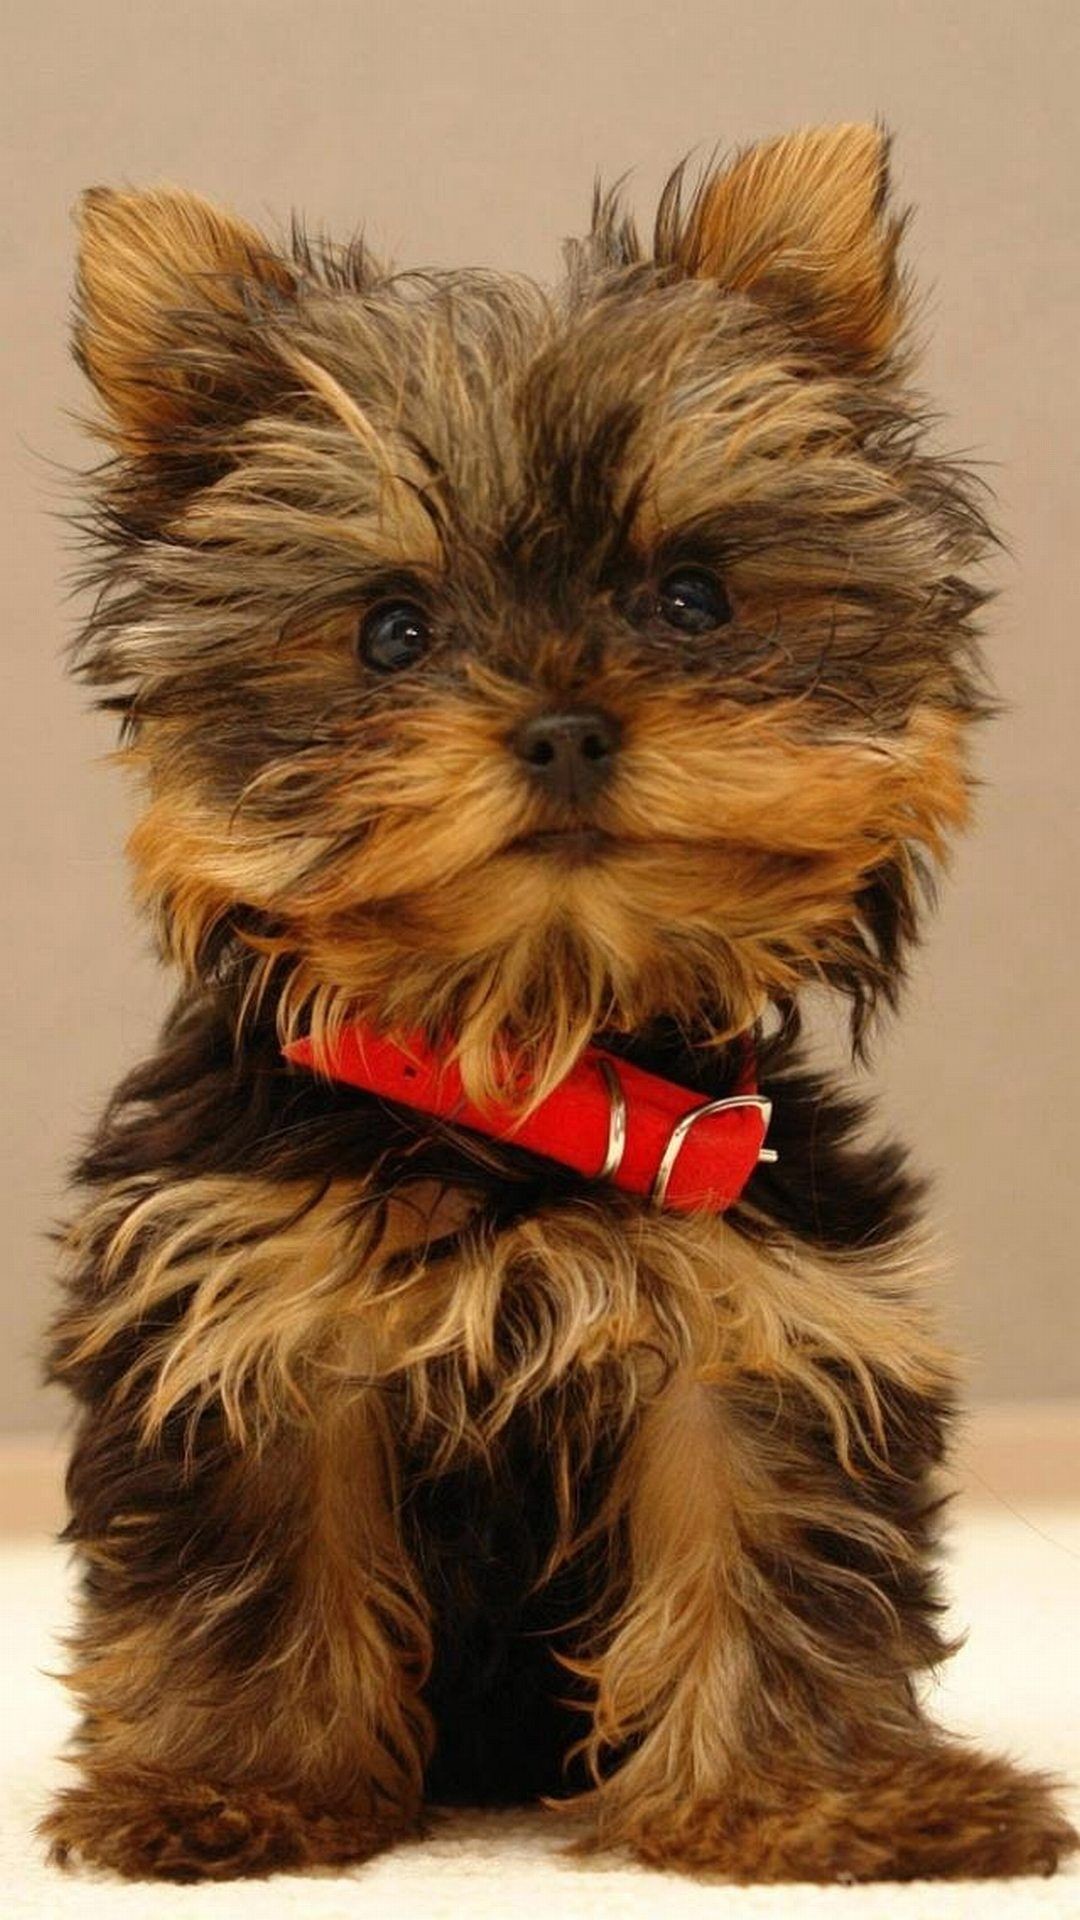 1080x1920 Yorkshire Terrier puppy - High quality htc one wallpapers and abstract  backgrounds designed by the best